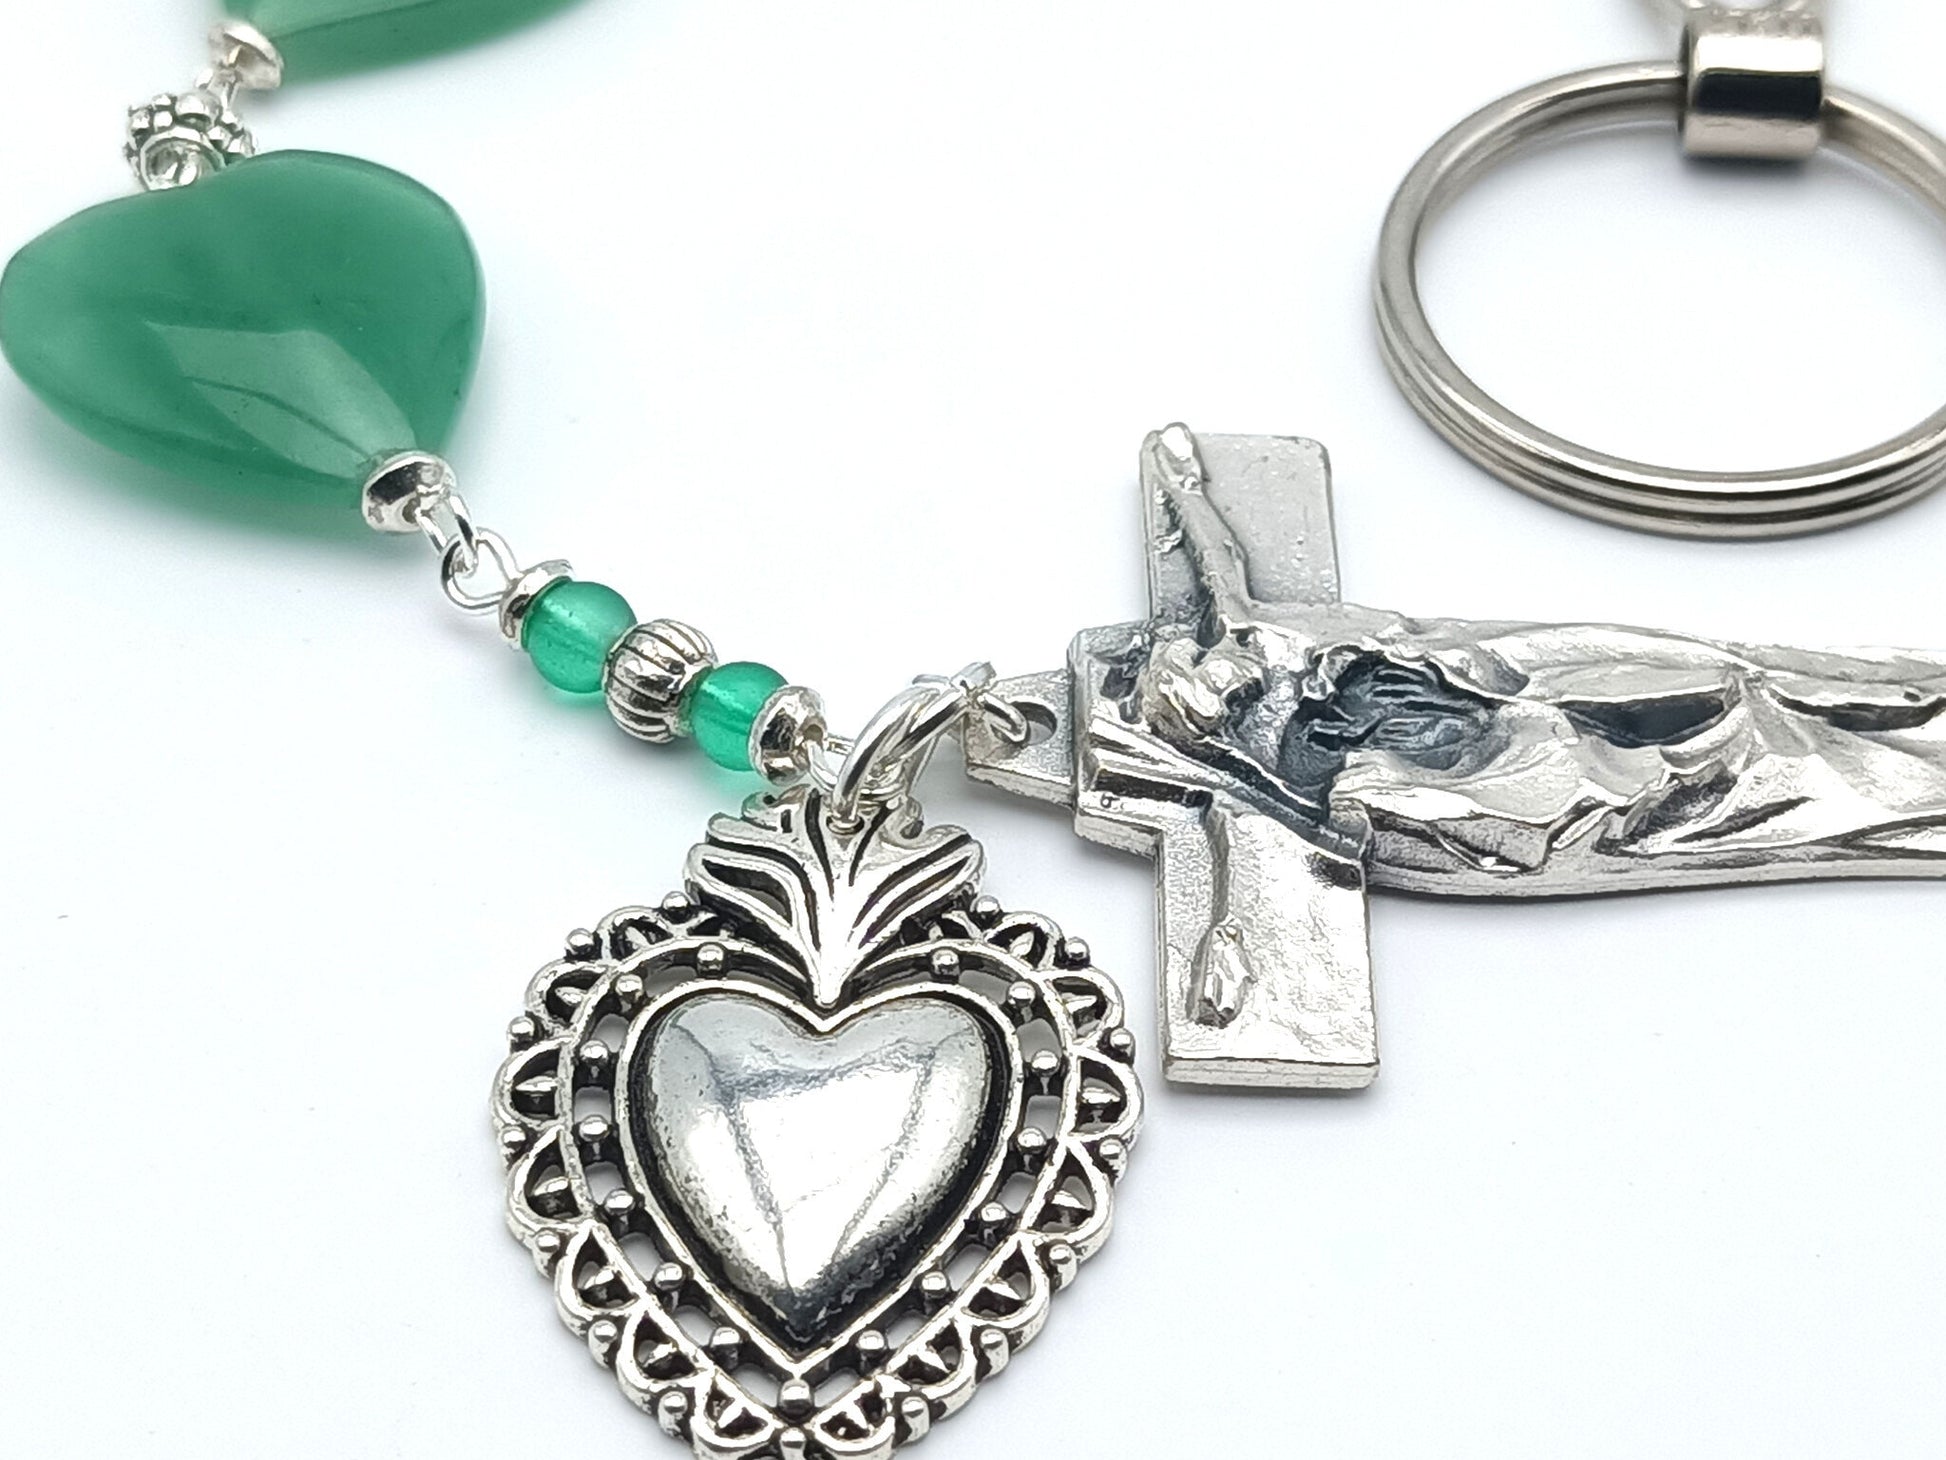 Three Hail Mary unique rosary beads chaplet with green gemstone beads, silver Our Lady of Sorrows crucifix and scared heart of Jesus medal.